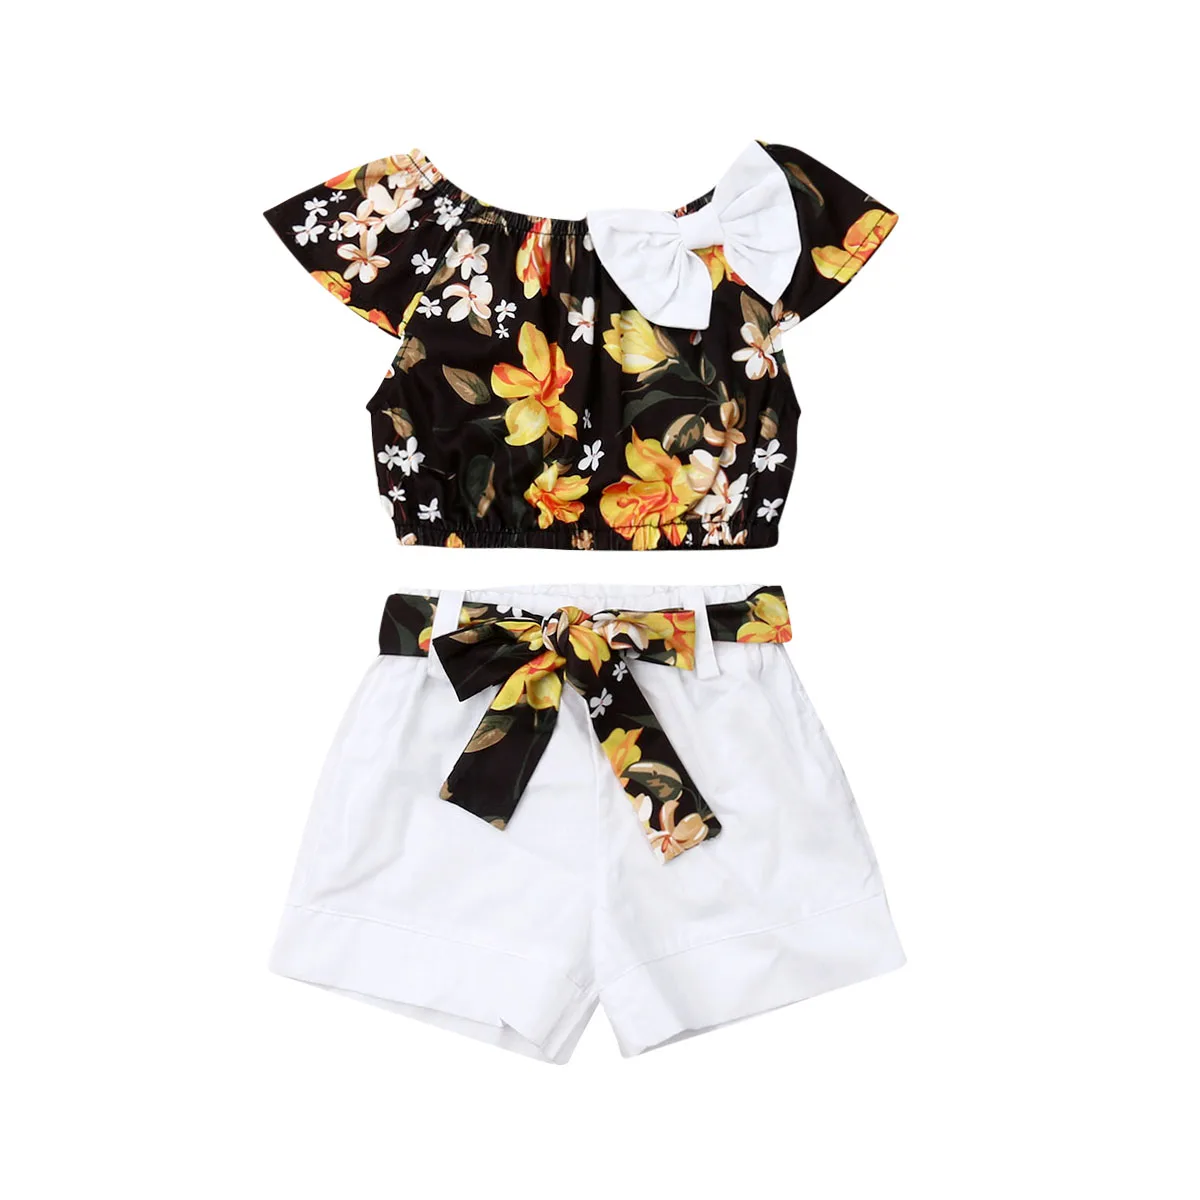 

1-5 Years Old Fashion Newborn Baby Kid Girl Clothes Summer Floarl Top T-shirt Solid Short Pant 2pcs Outfits Set Clothing